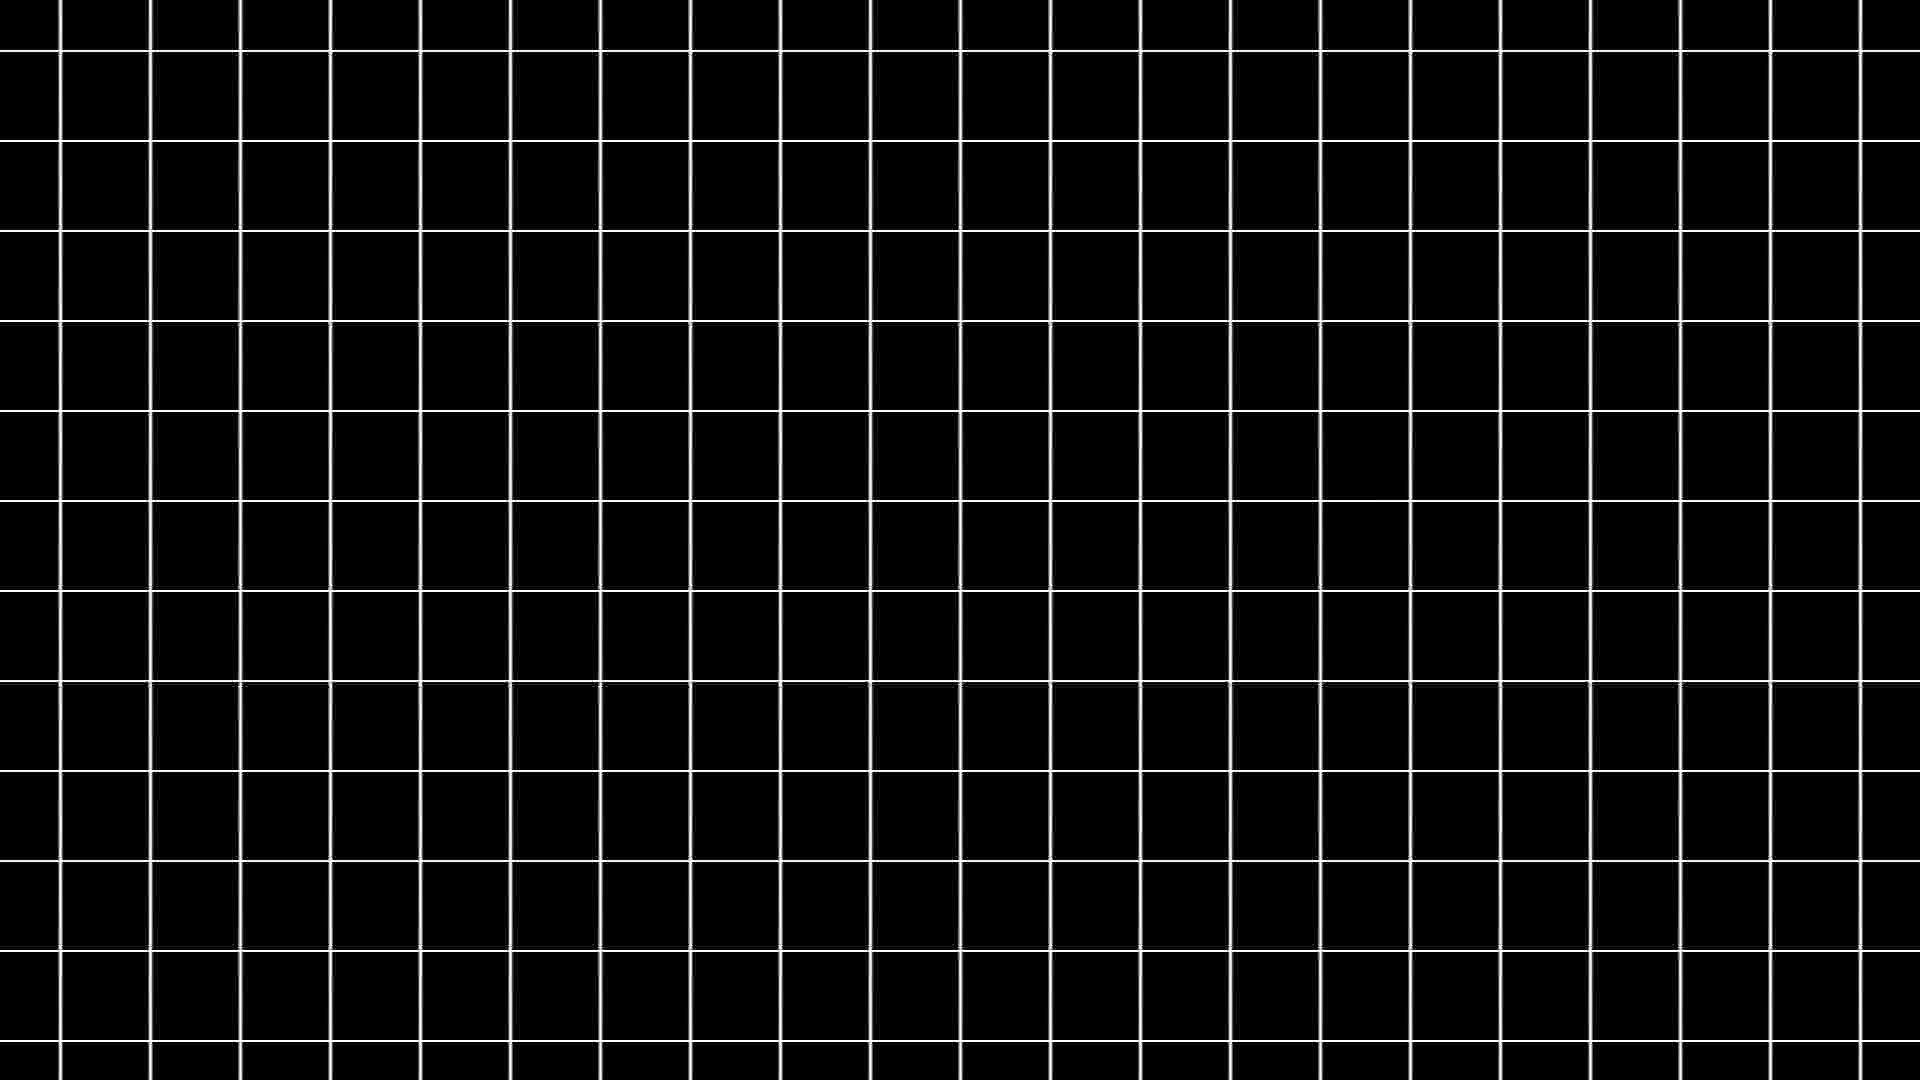 Black and White Aesthetic Grid Wallpaper Free Black and White Aesthetic Grid Background